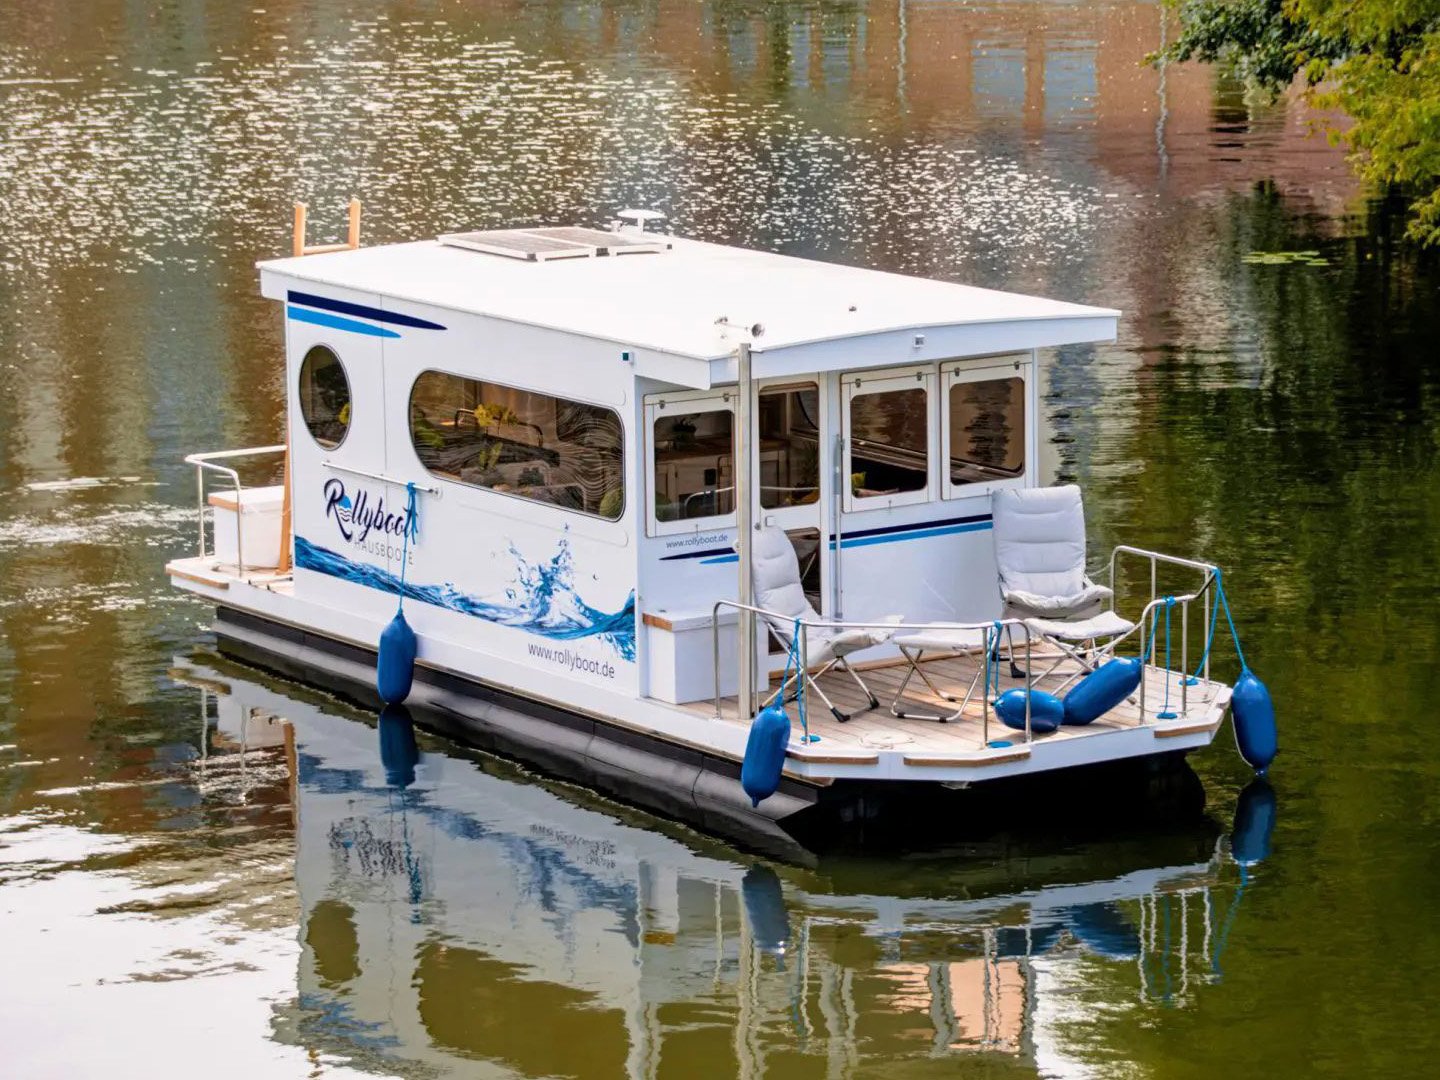 Electric houseboats - self-sufficient and efficient